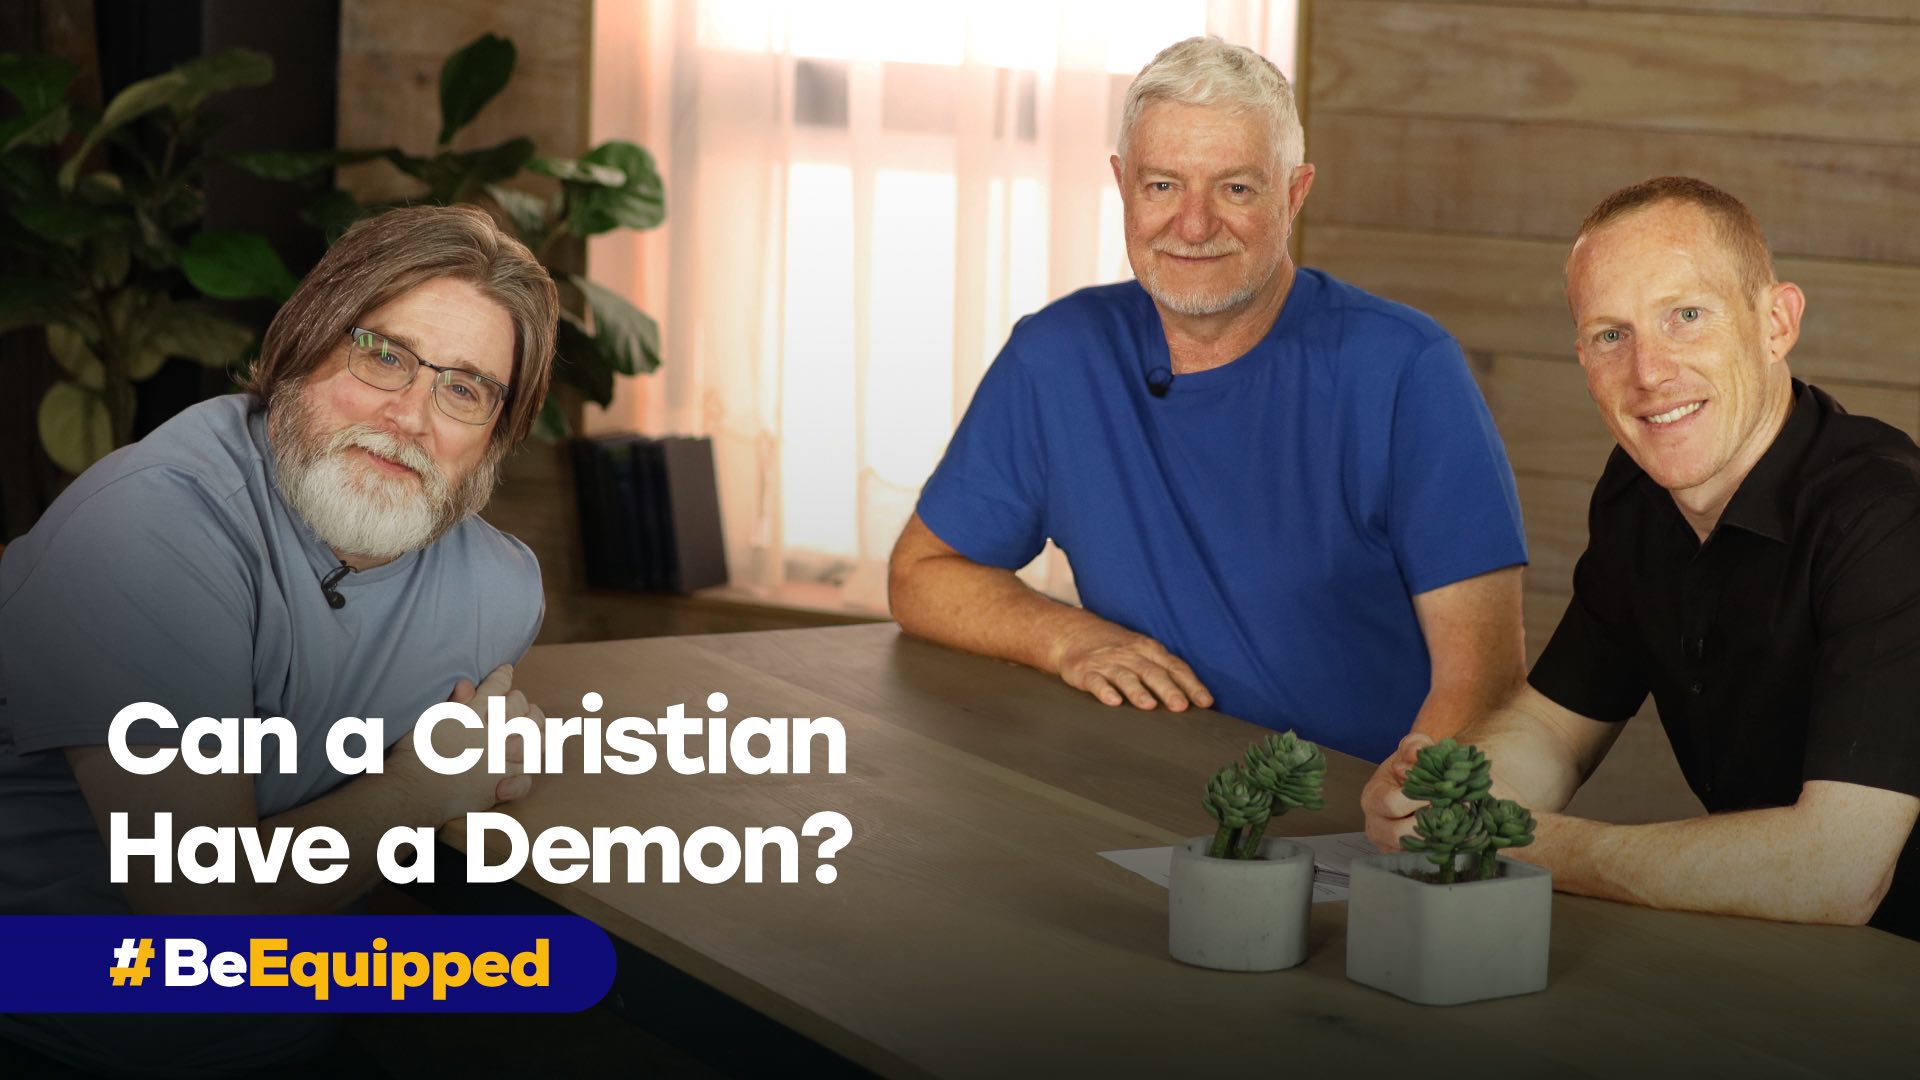 Video image for 'Can a Christian Have a Demon?’ in the #BeEquipped series